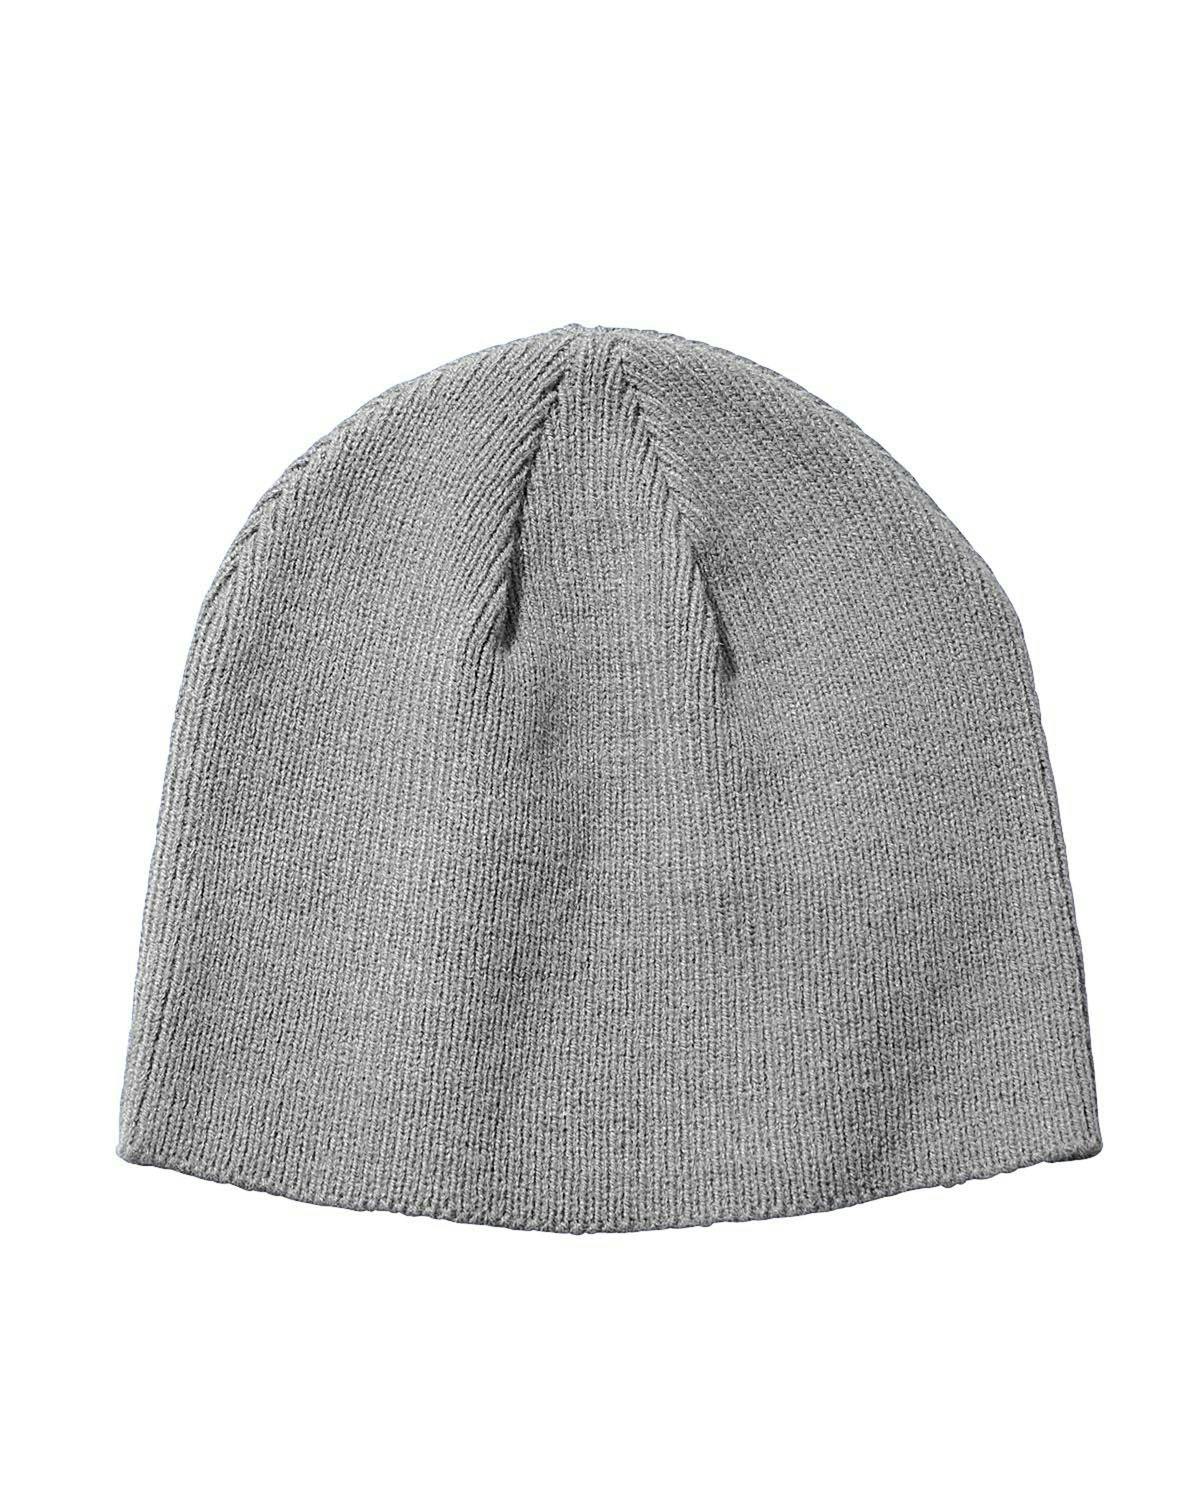 Image for Knit Beanie